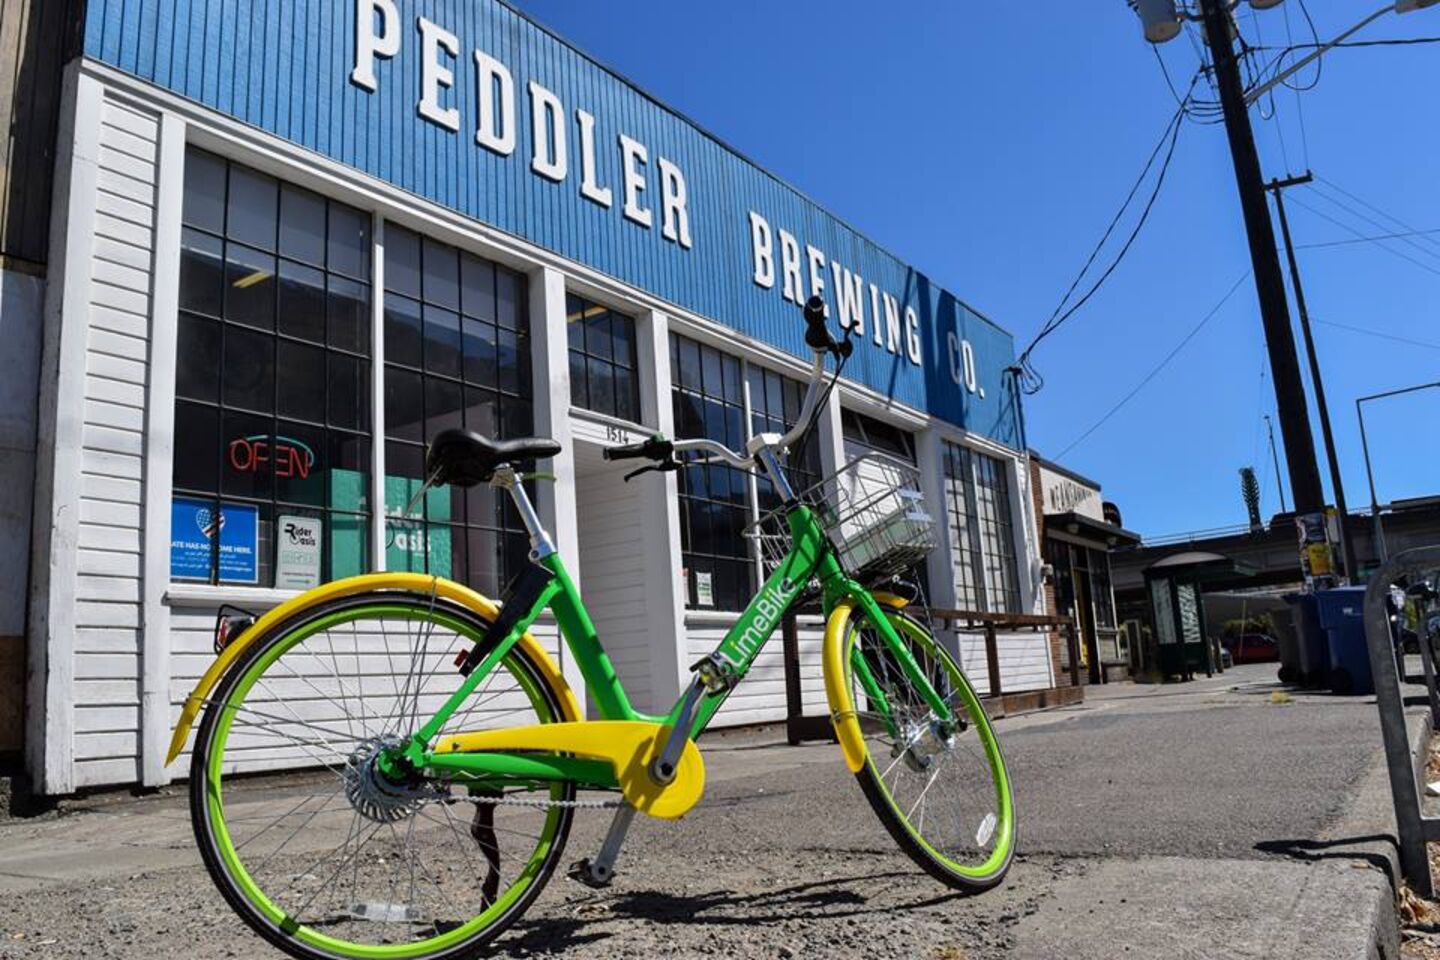 A photo of Peddler Brewing Company